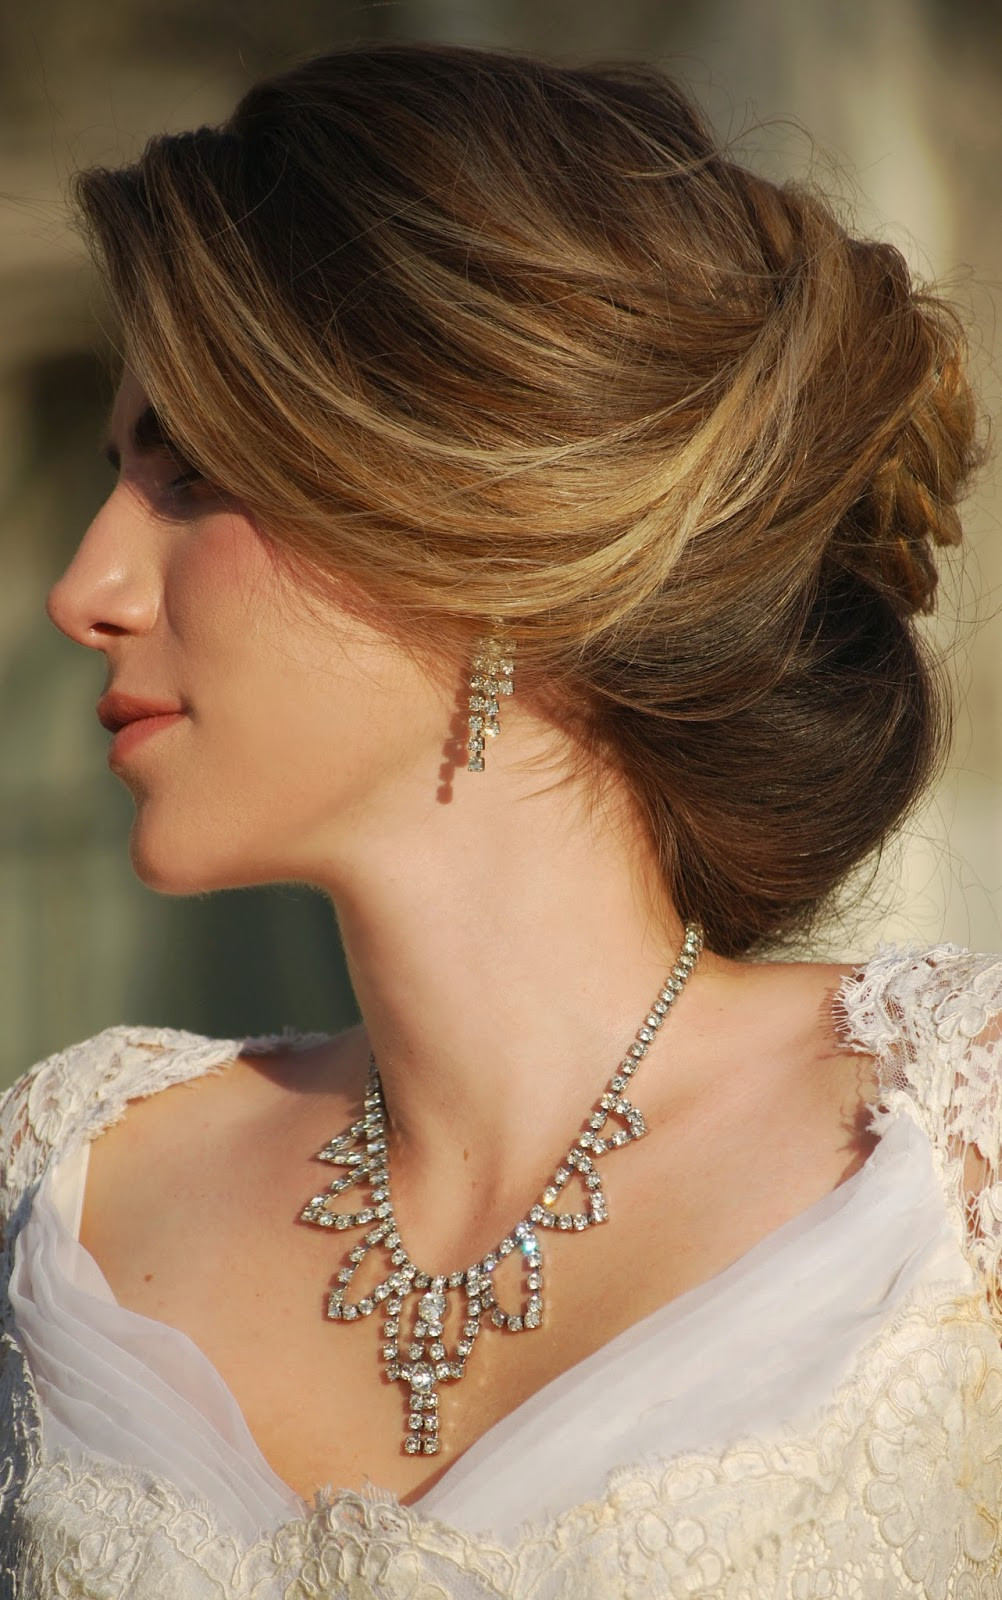 Updo Wedding Hairstyles For Long Hair
 10 Best Hairstyles for Long Hair Updos Hair Fashion